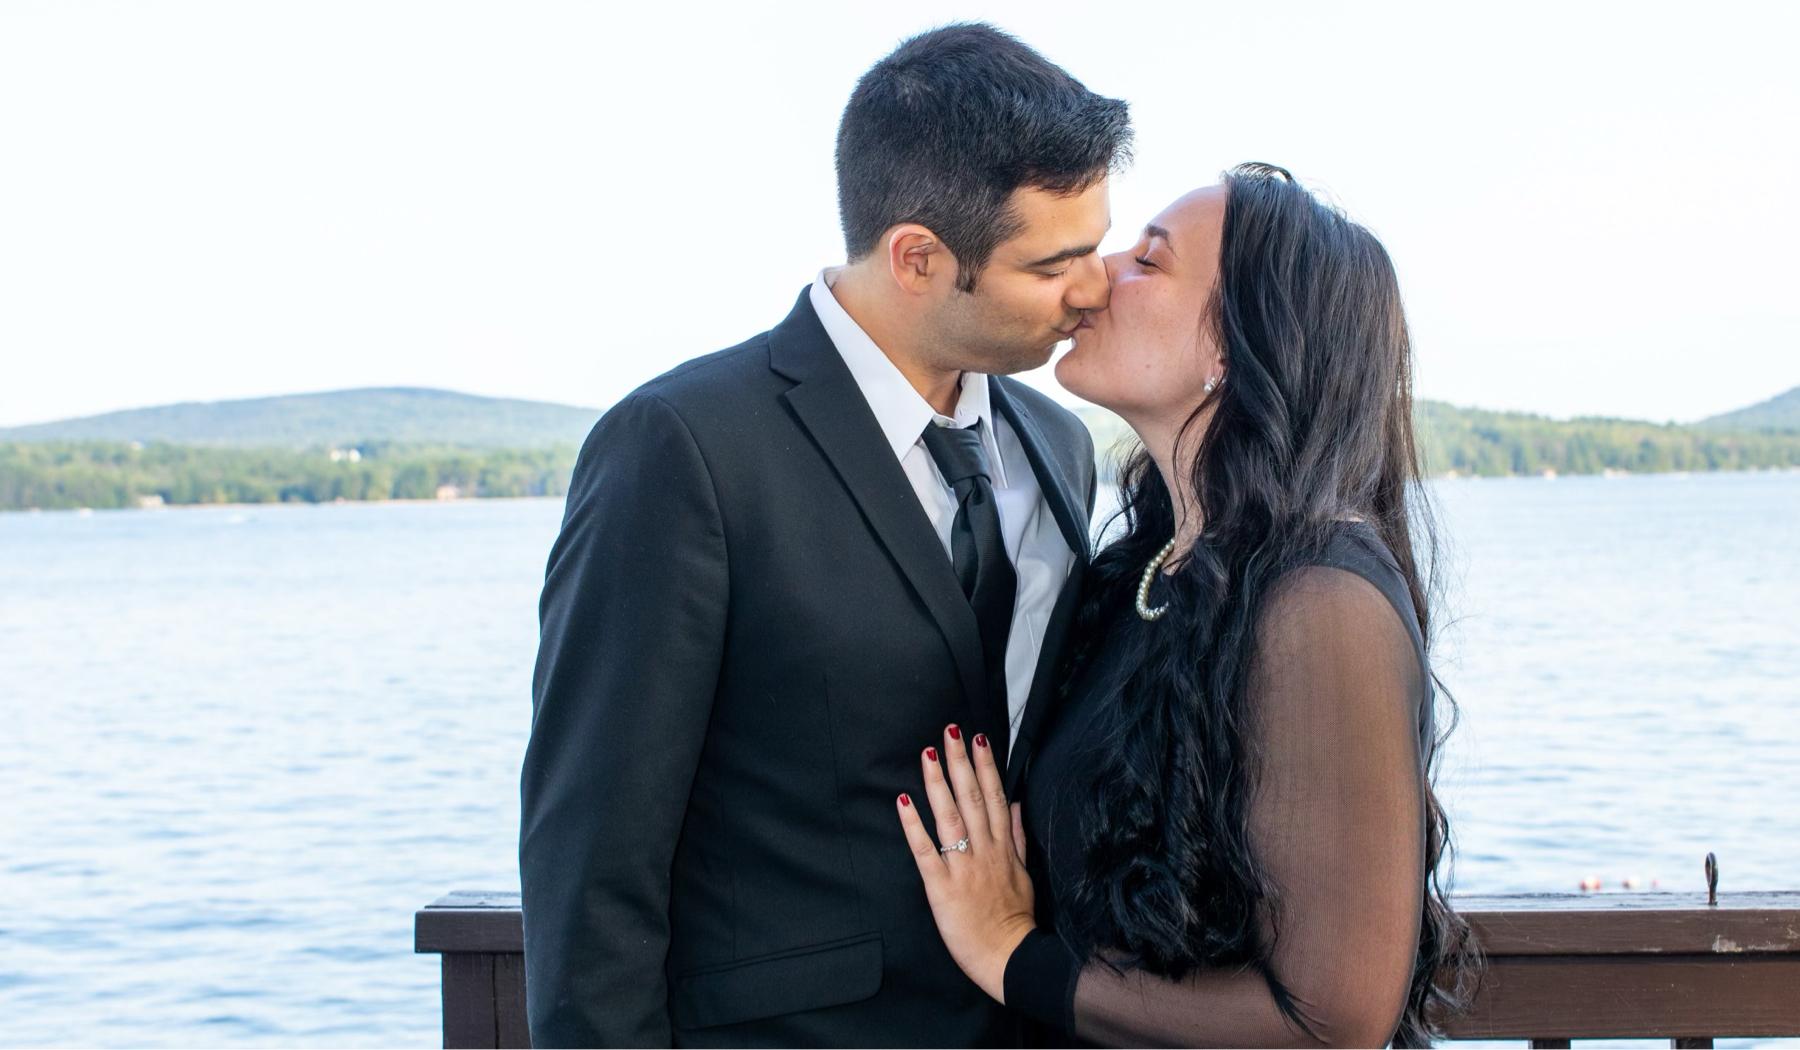 The Wedding Website of Julianne Maia and Jacob Blend